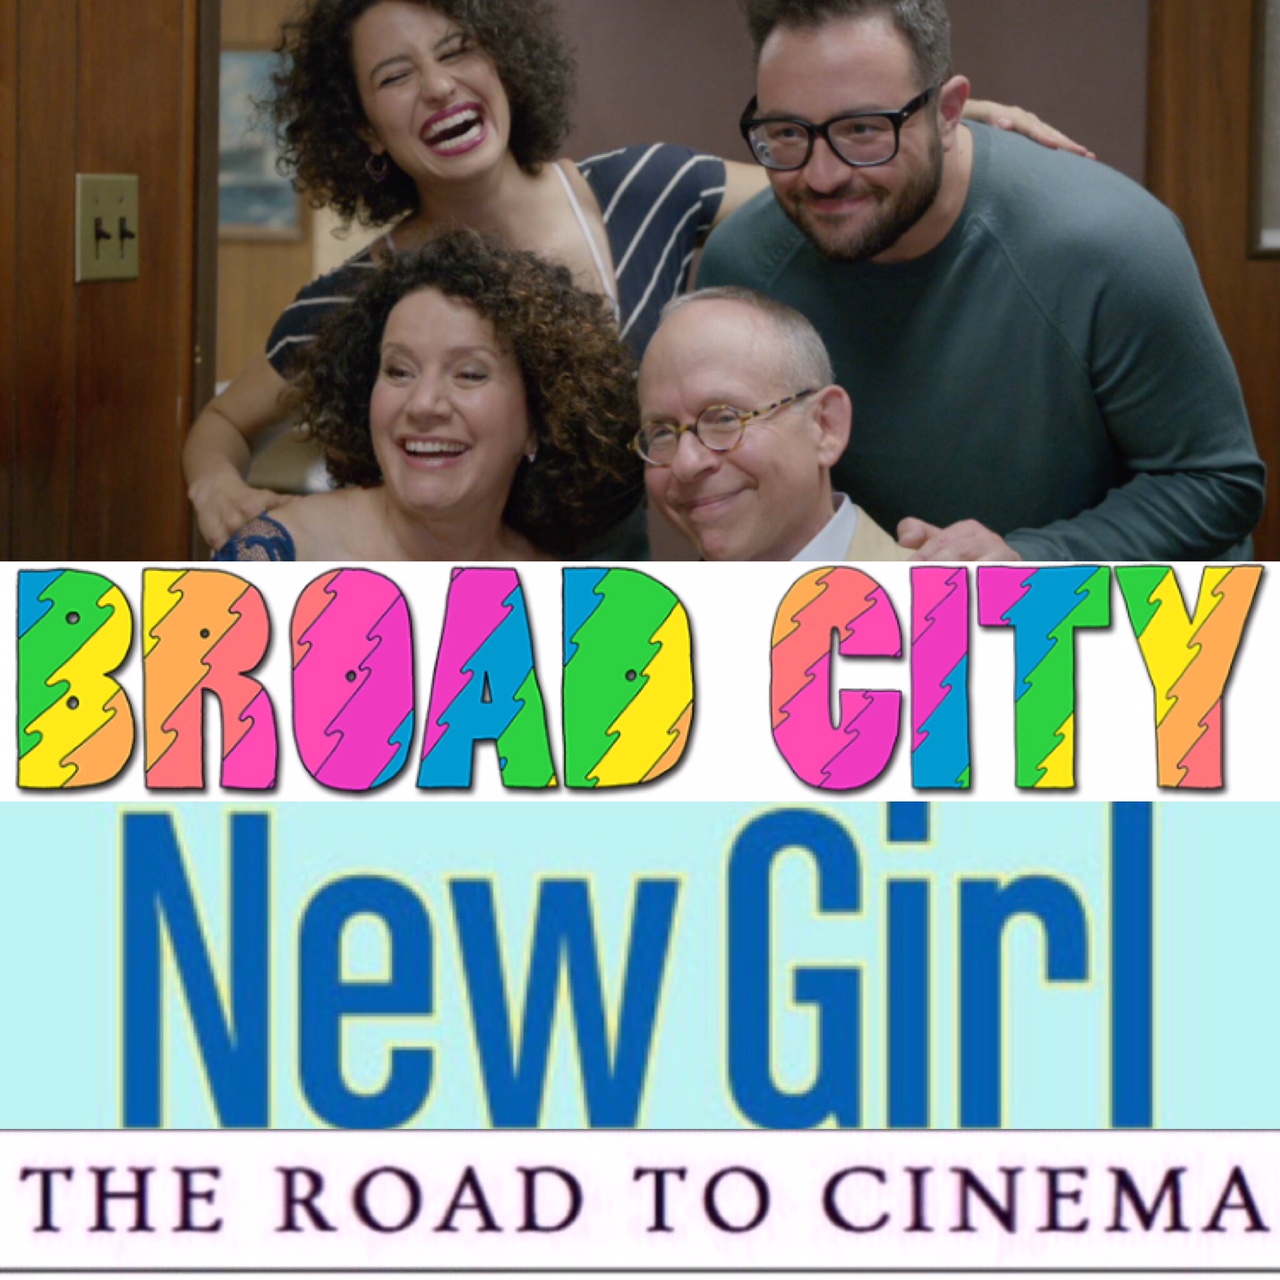 Eliot Glazer on writing for ‘New Girl’, acting on ‘Broad City’, improv, and his live musical-comedy show ‘Haunting Renditions’